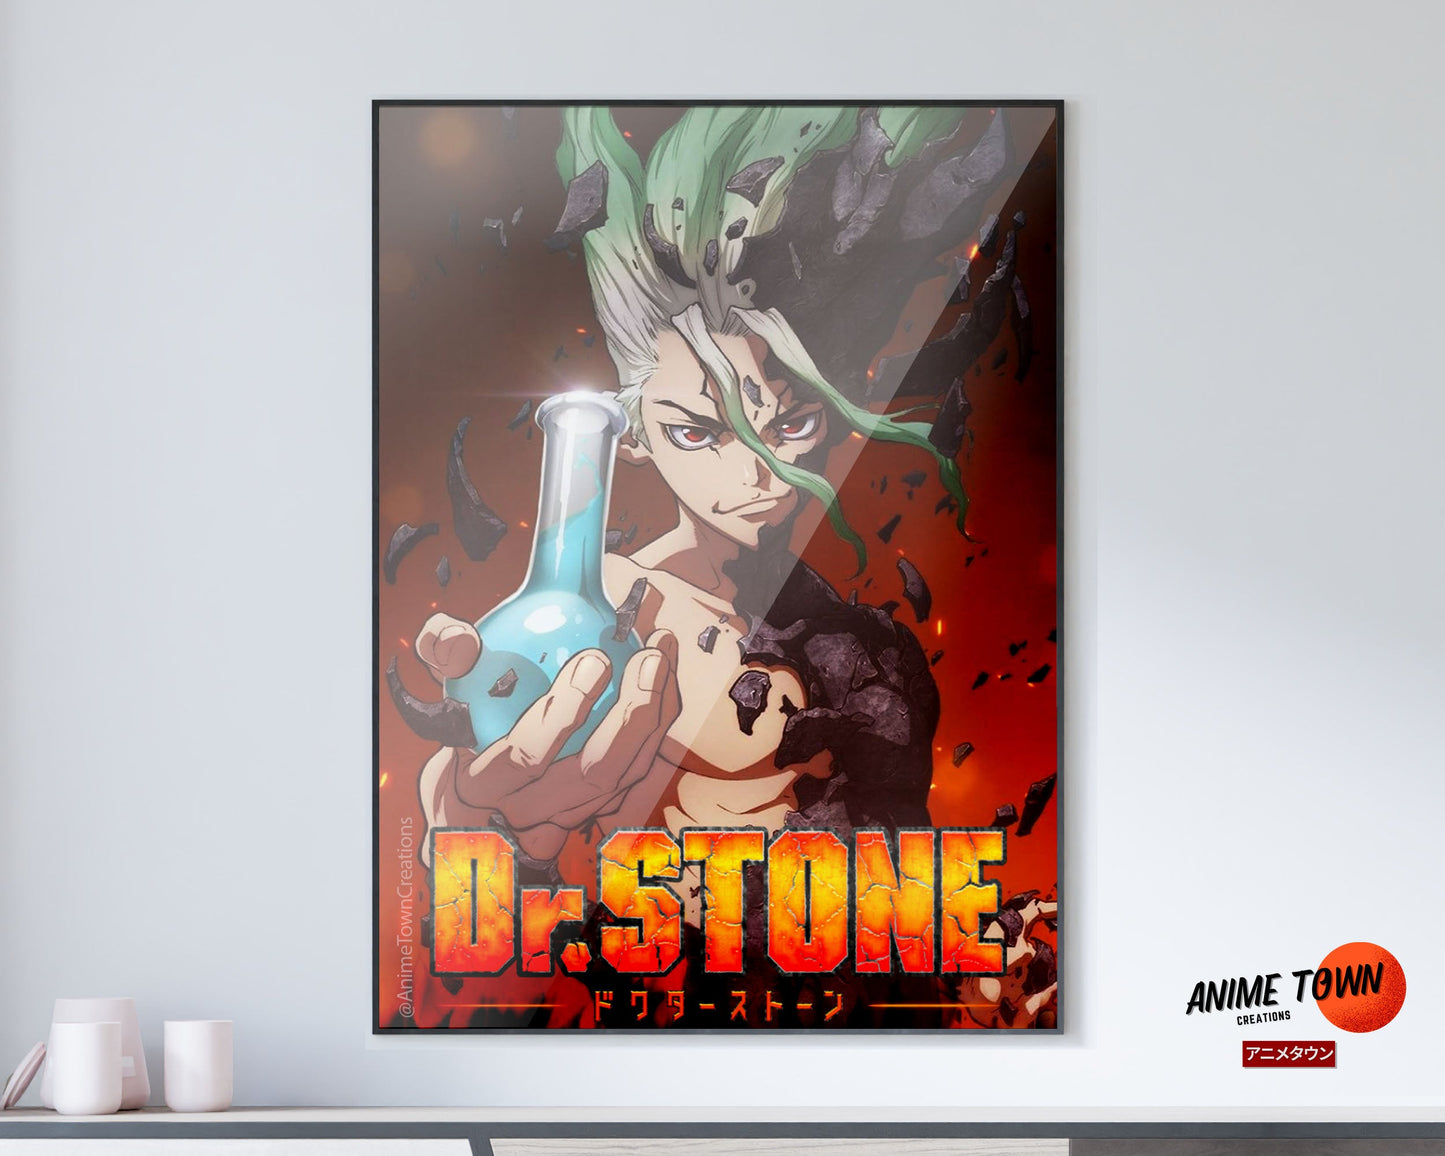 Anime Town Creations Poster Dr Stone 5" x 7" Home Goods - Anime Dr Stone Poster